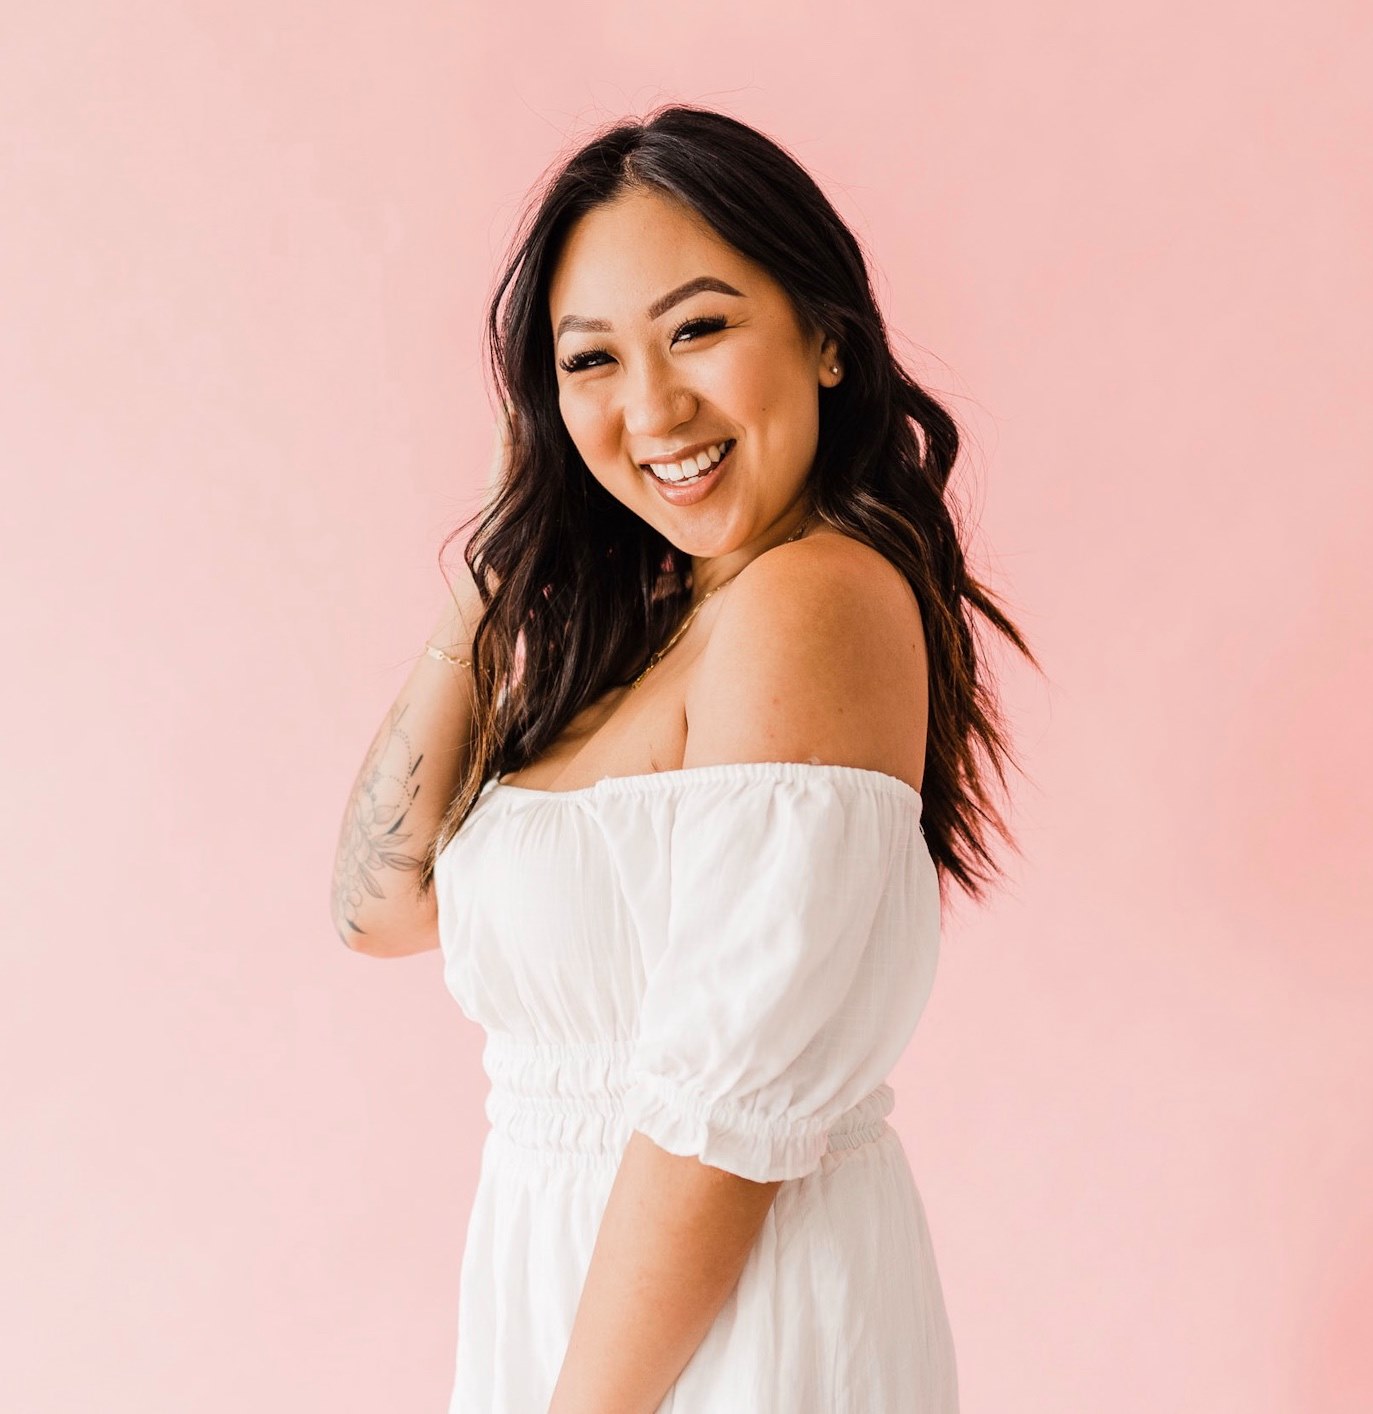 Hear Tiffany Cheung on the Breakthrough Brand Podcast talk about building a six-figure business after being laid off from the pandemic.